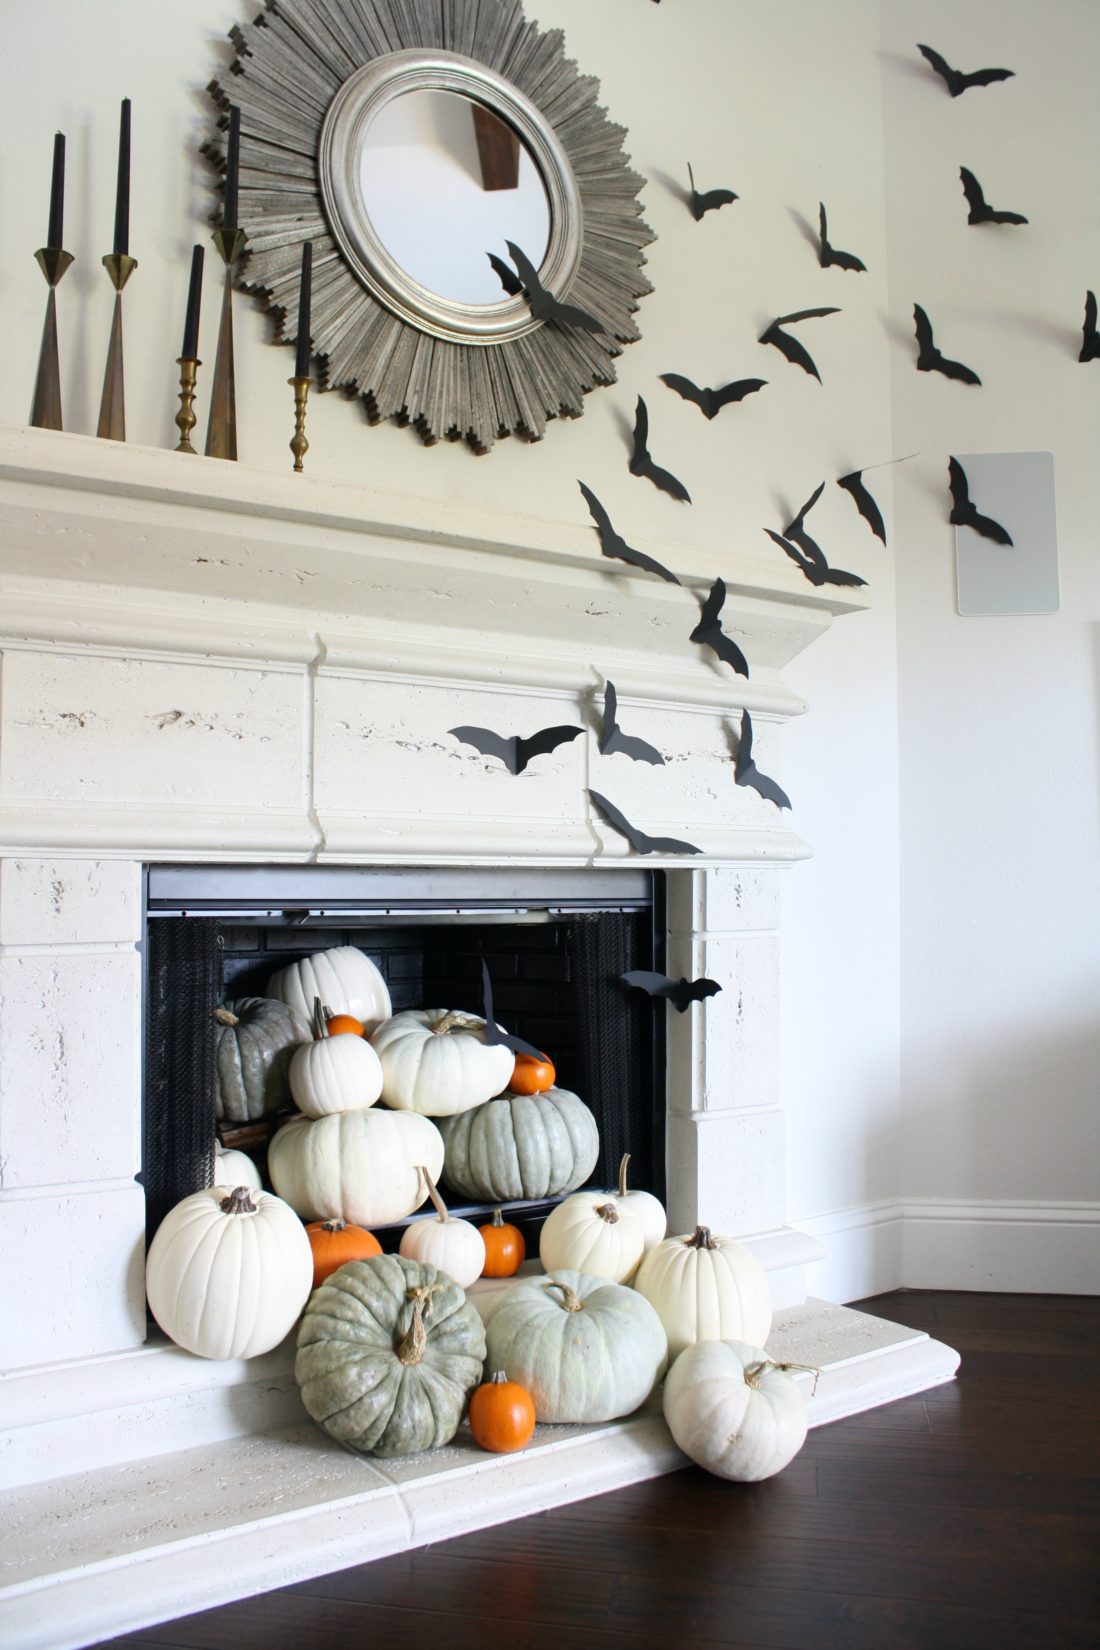 36 HQ Images How To Make Bat Decorations / How To Make A Halloween Bat | HuffPost UK